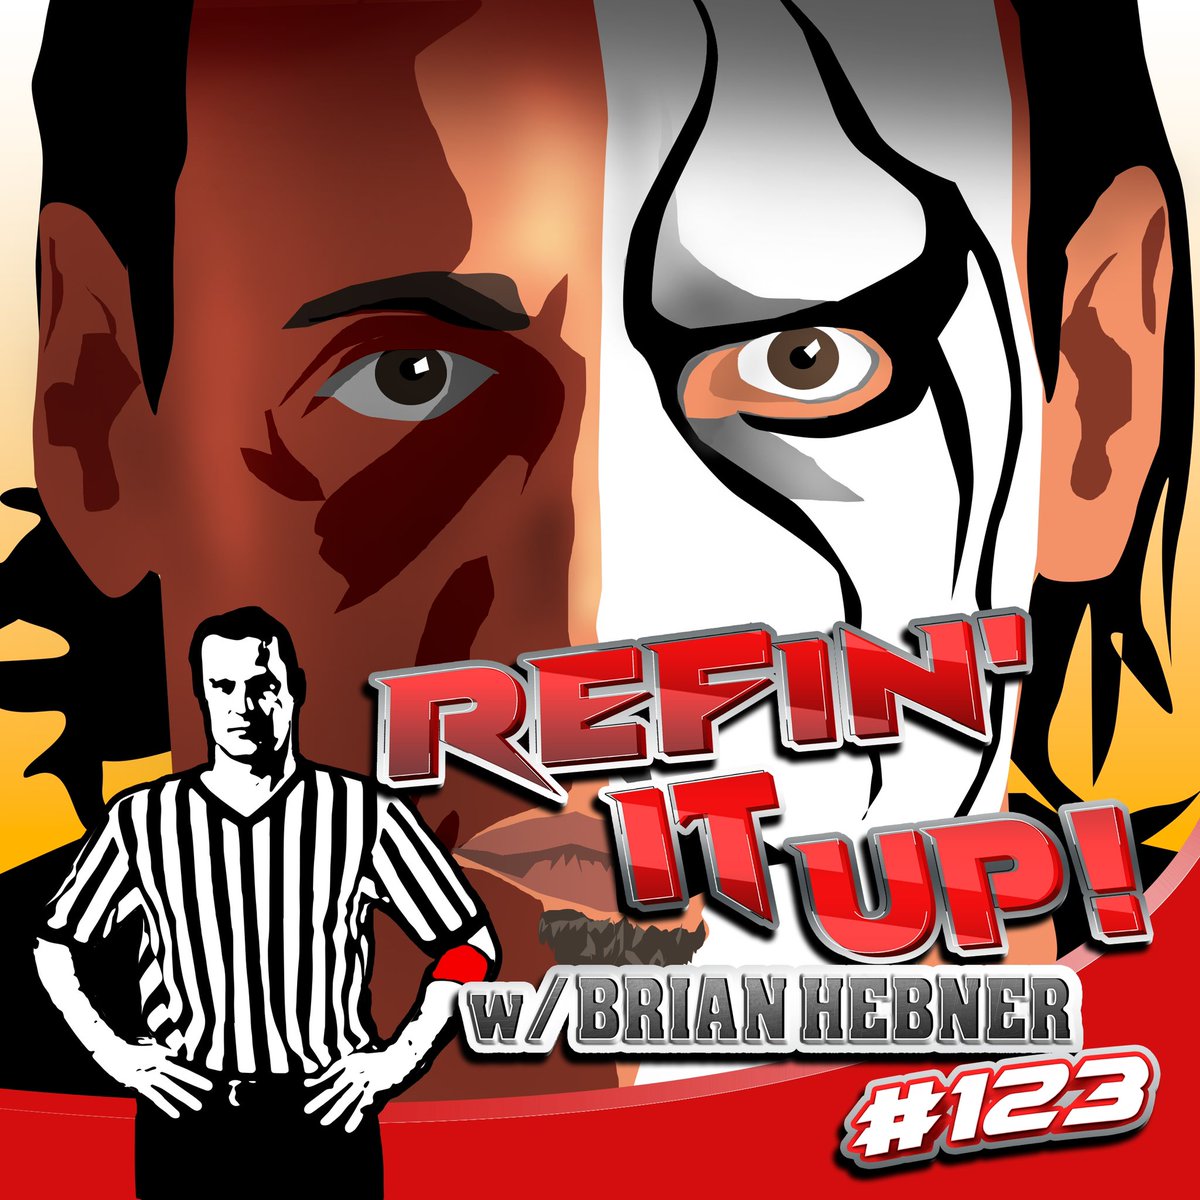 This week it’s all about Sting. Brian speaks on his early career as well as the match he had against Jeff Hardy at Victory Road 2011 and the debacle that it was. 

@babyhebner 
@RealRaymondJay 

https://t.co/JBD7TYFQXp

#123 #RantersNation 

Artwork by @JDHoop702 https://t.co/H9sCPK86ly